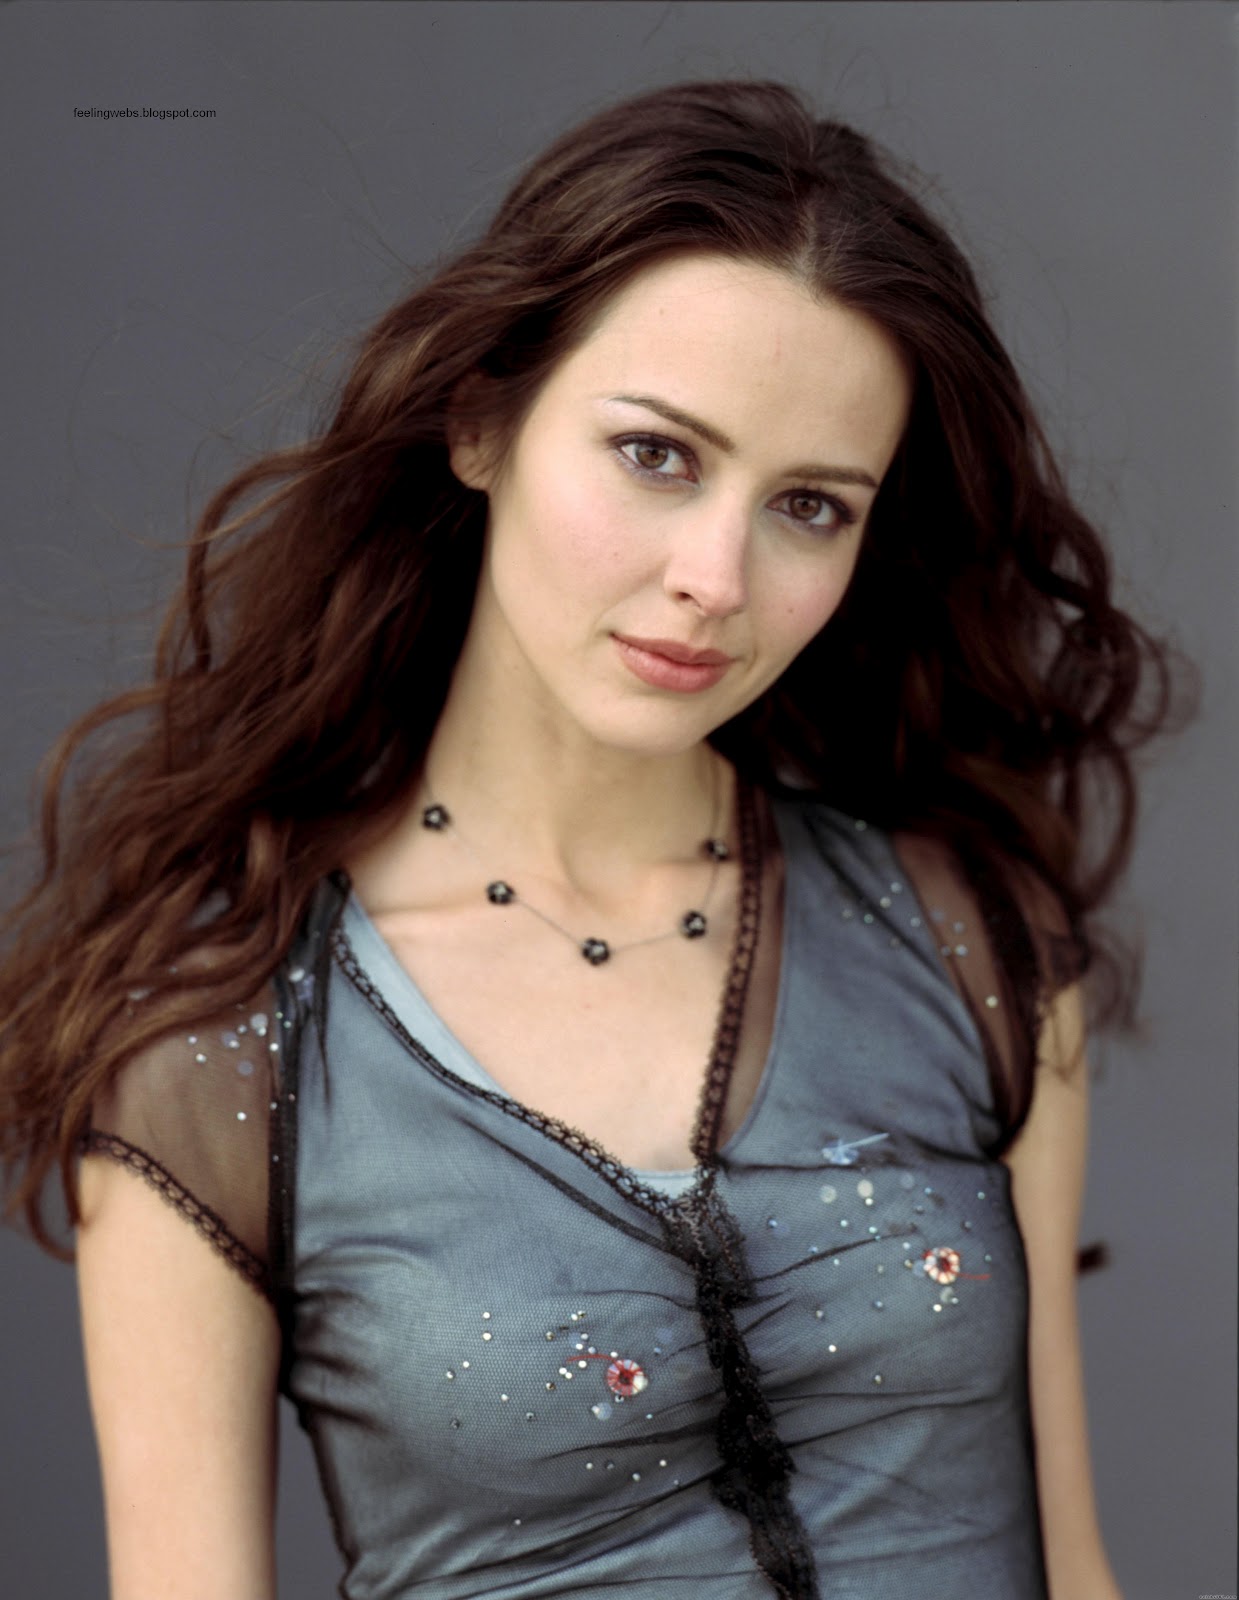 STARS WALLPAPER: Amy Acker HD Wallpapers Free Download